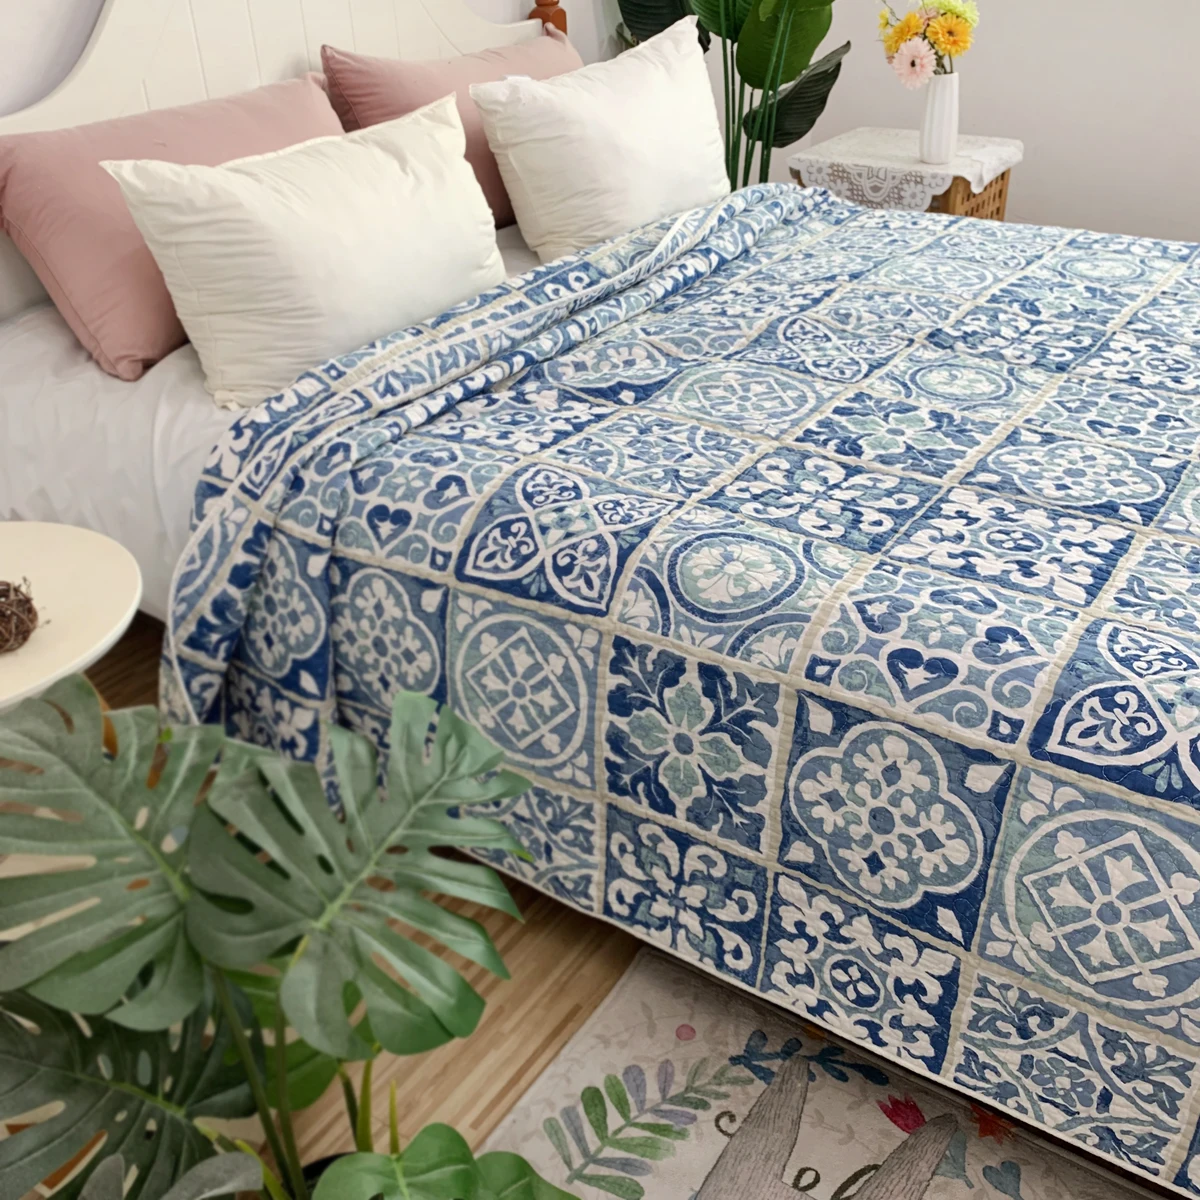 

Cotton Bedspread Quilted Bed Cover Pastoral Style Coverlet Non Slip Sheet Blanket Quilt Warm Printied Bedding 230x250cm Size